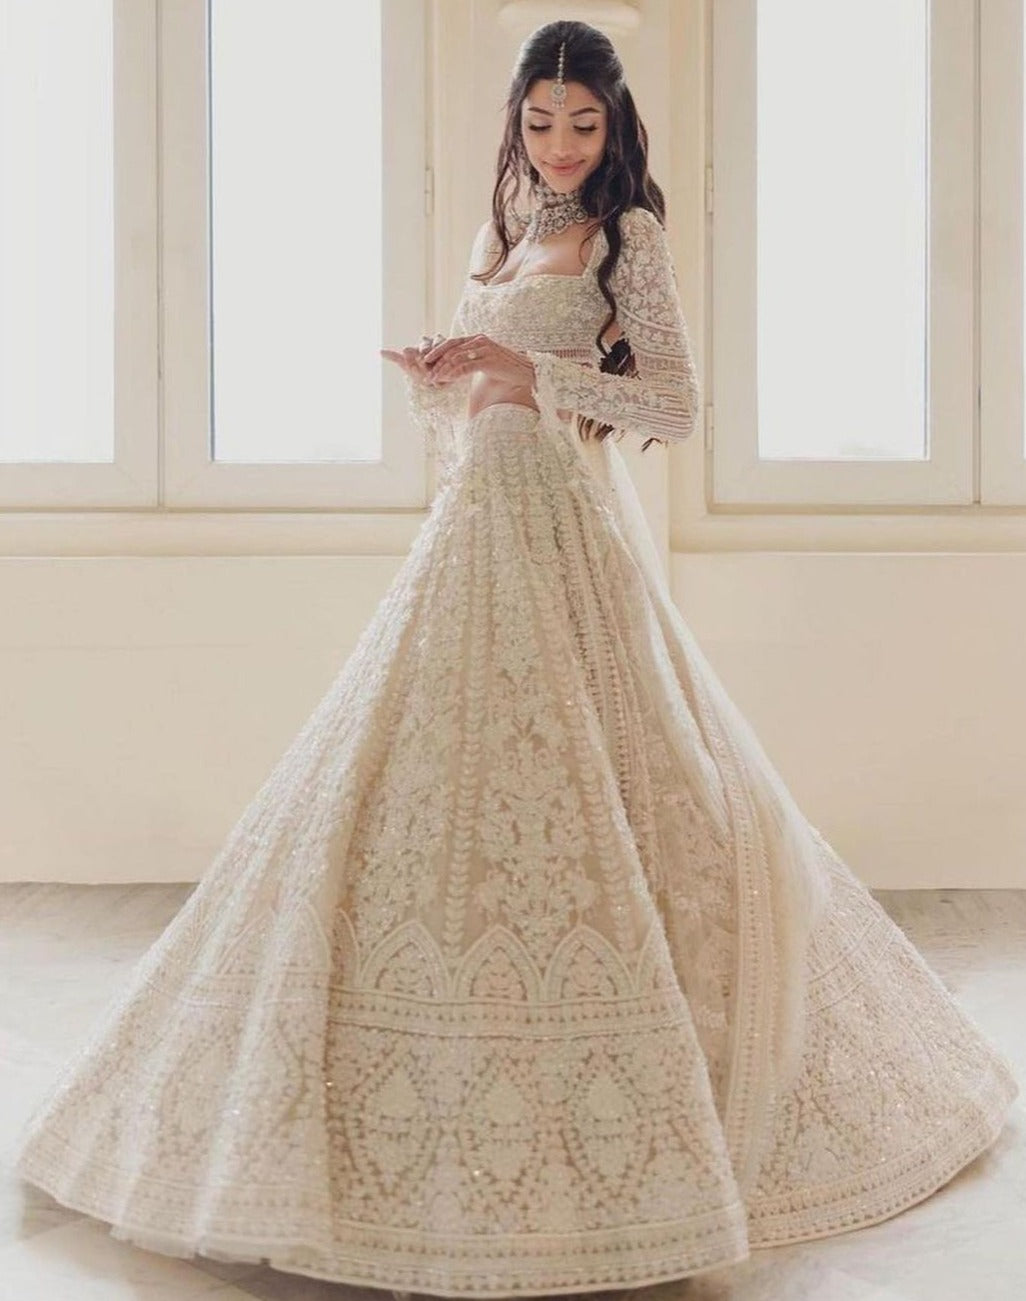 Trending | $387 - $645 - Cream Engagement Readymade Rayon Plain Designer Lehenga  Choli, Cream Engagement Readymade Rayon Plain Designer Lehengas and Cream  Engagement Readymade Rayon Plain Ghagra Chaniya Cholis Online Shopping